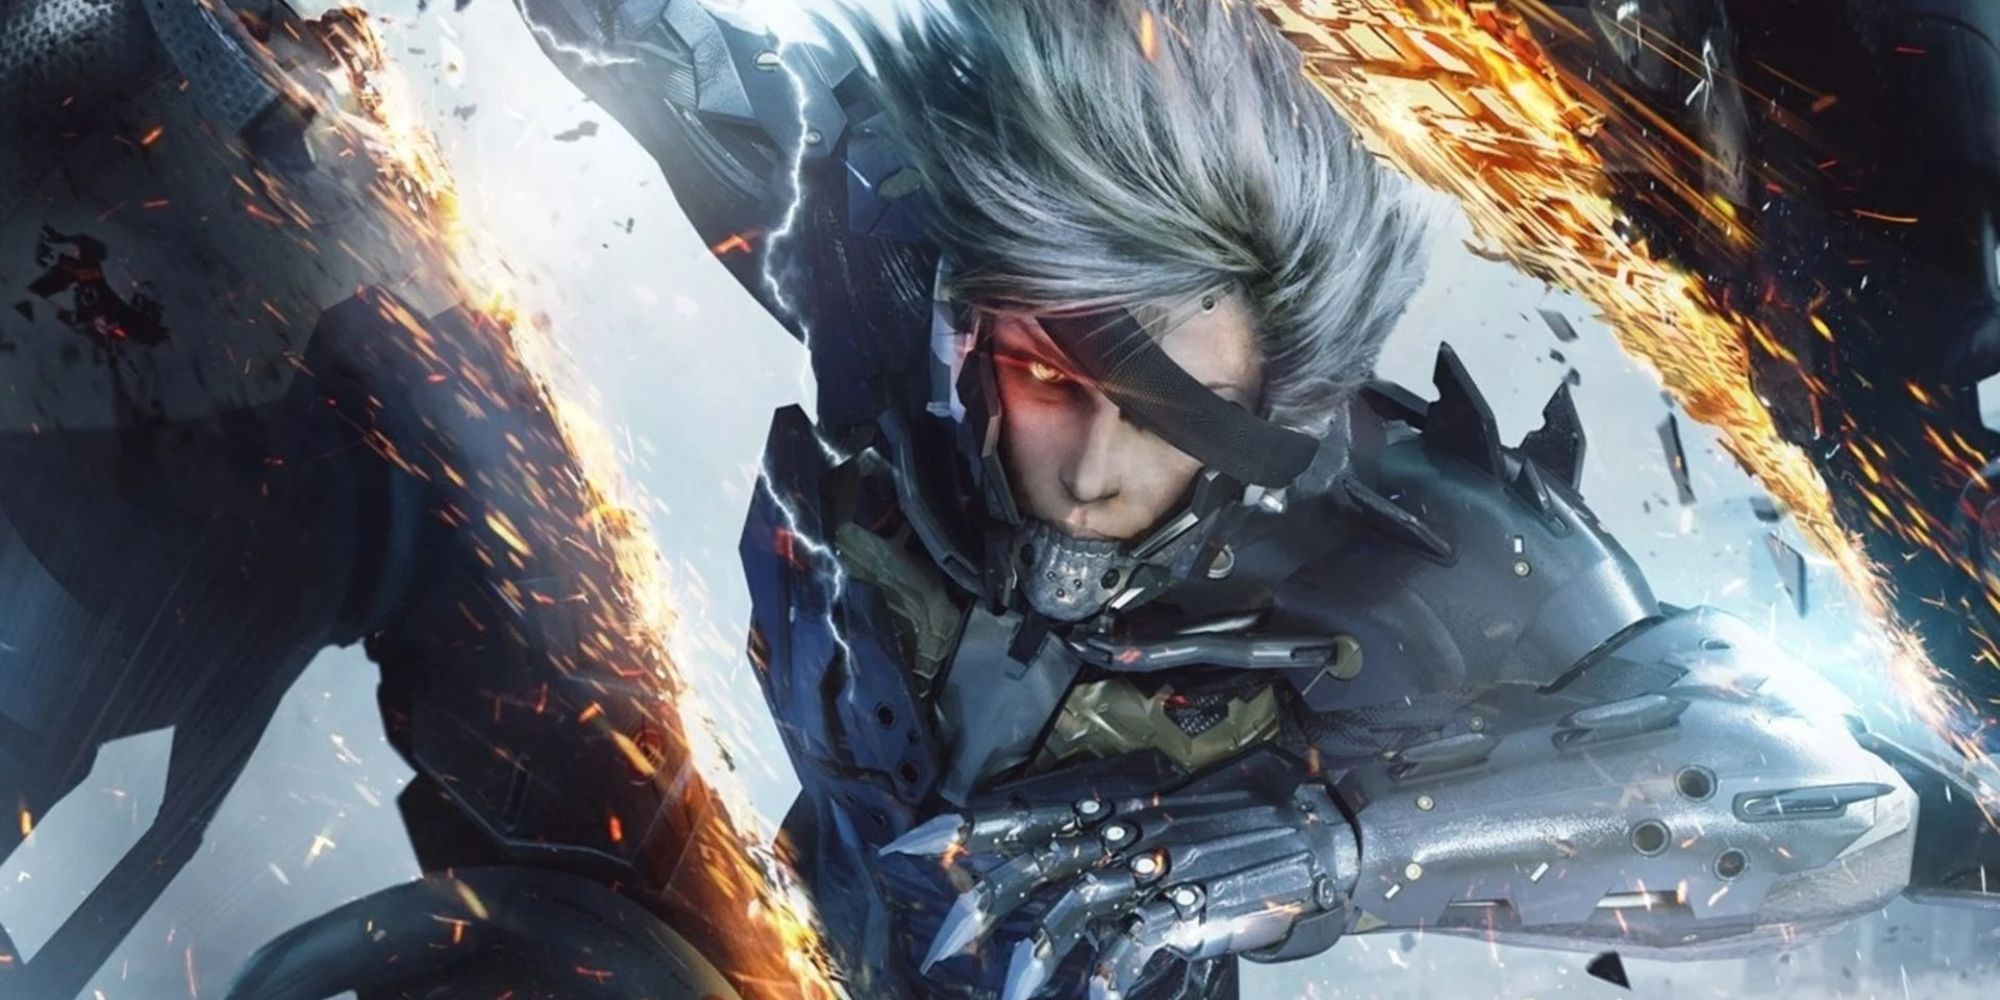 Metal Gear Rising Revengance featuring Raiden slicing the picture with his katana